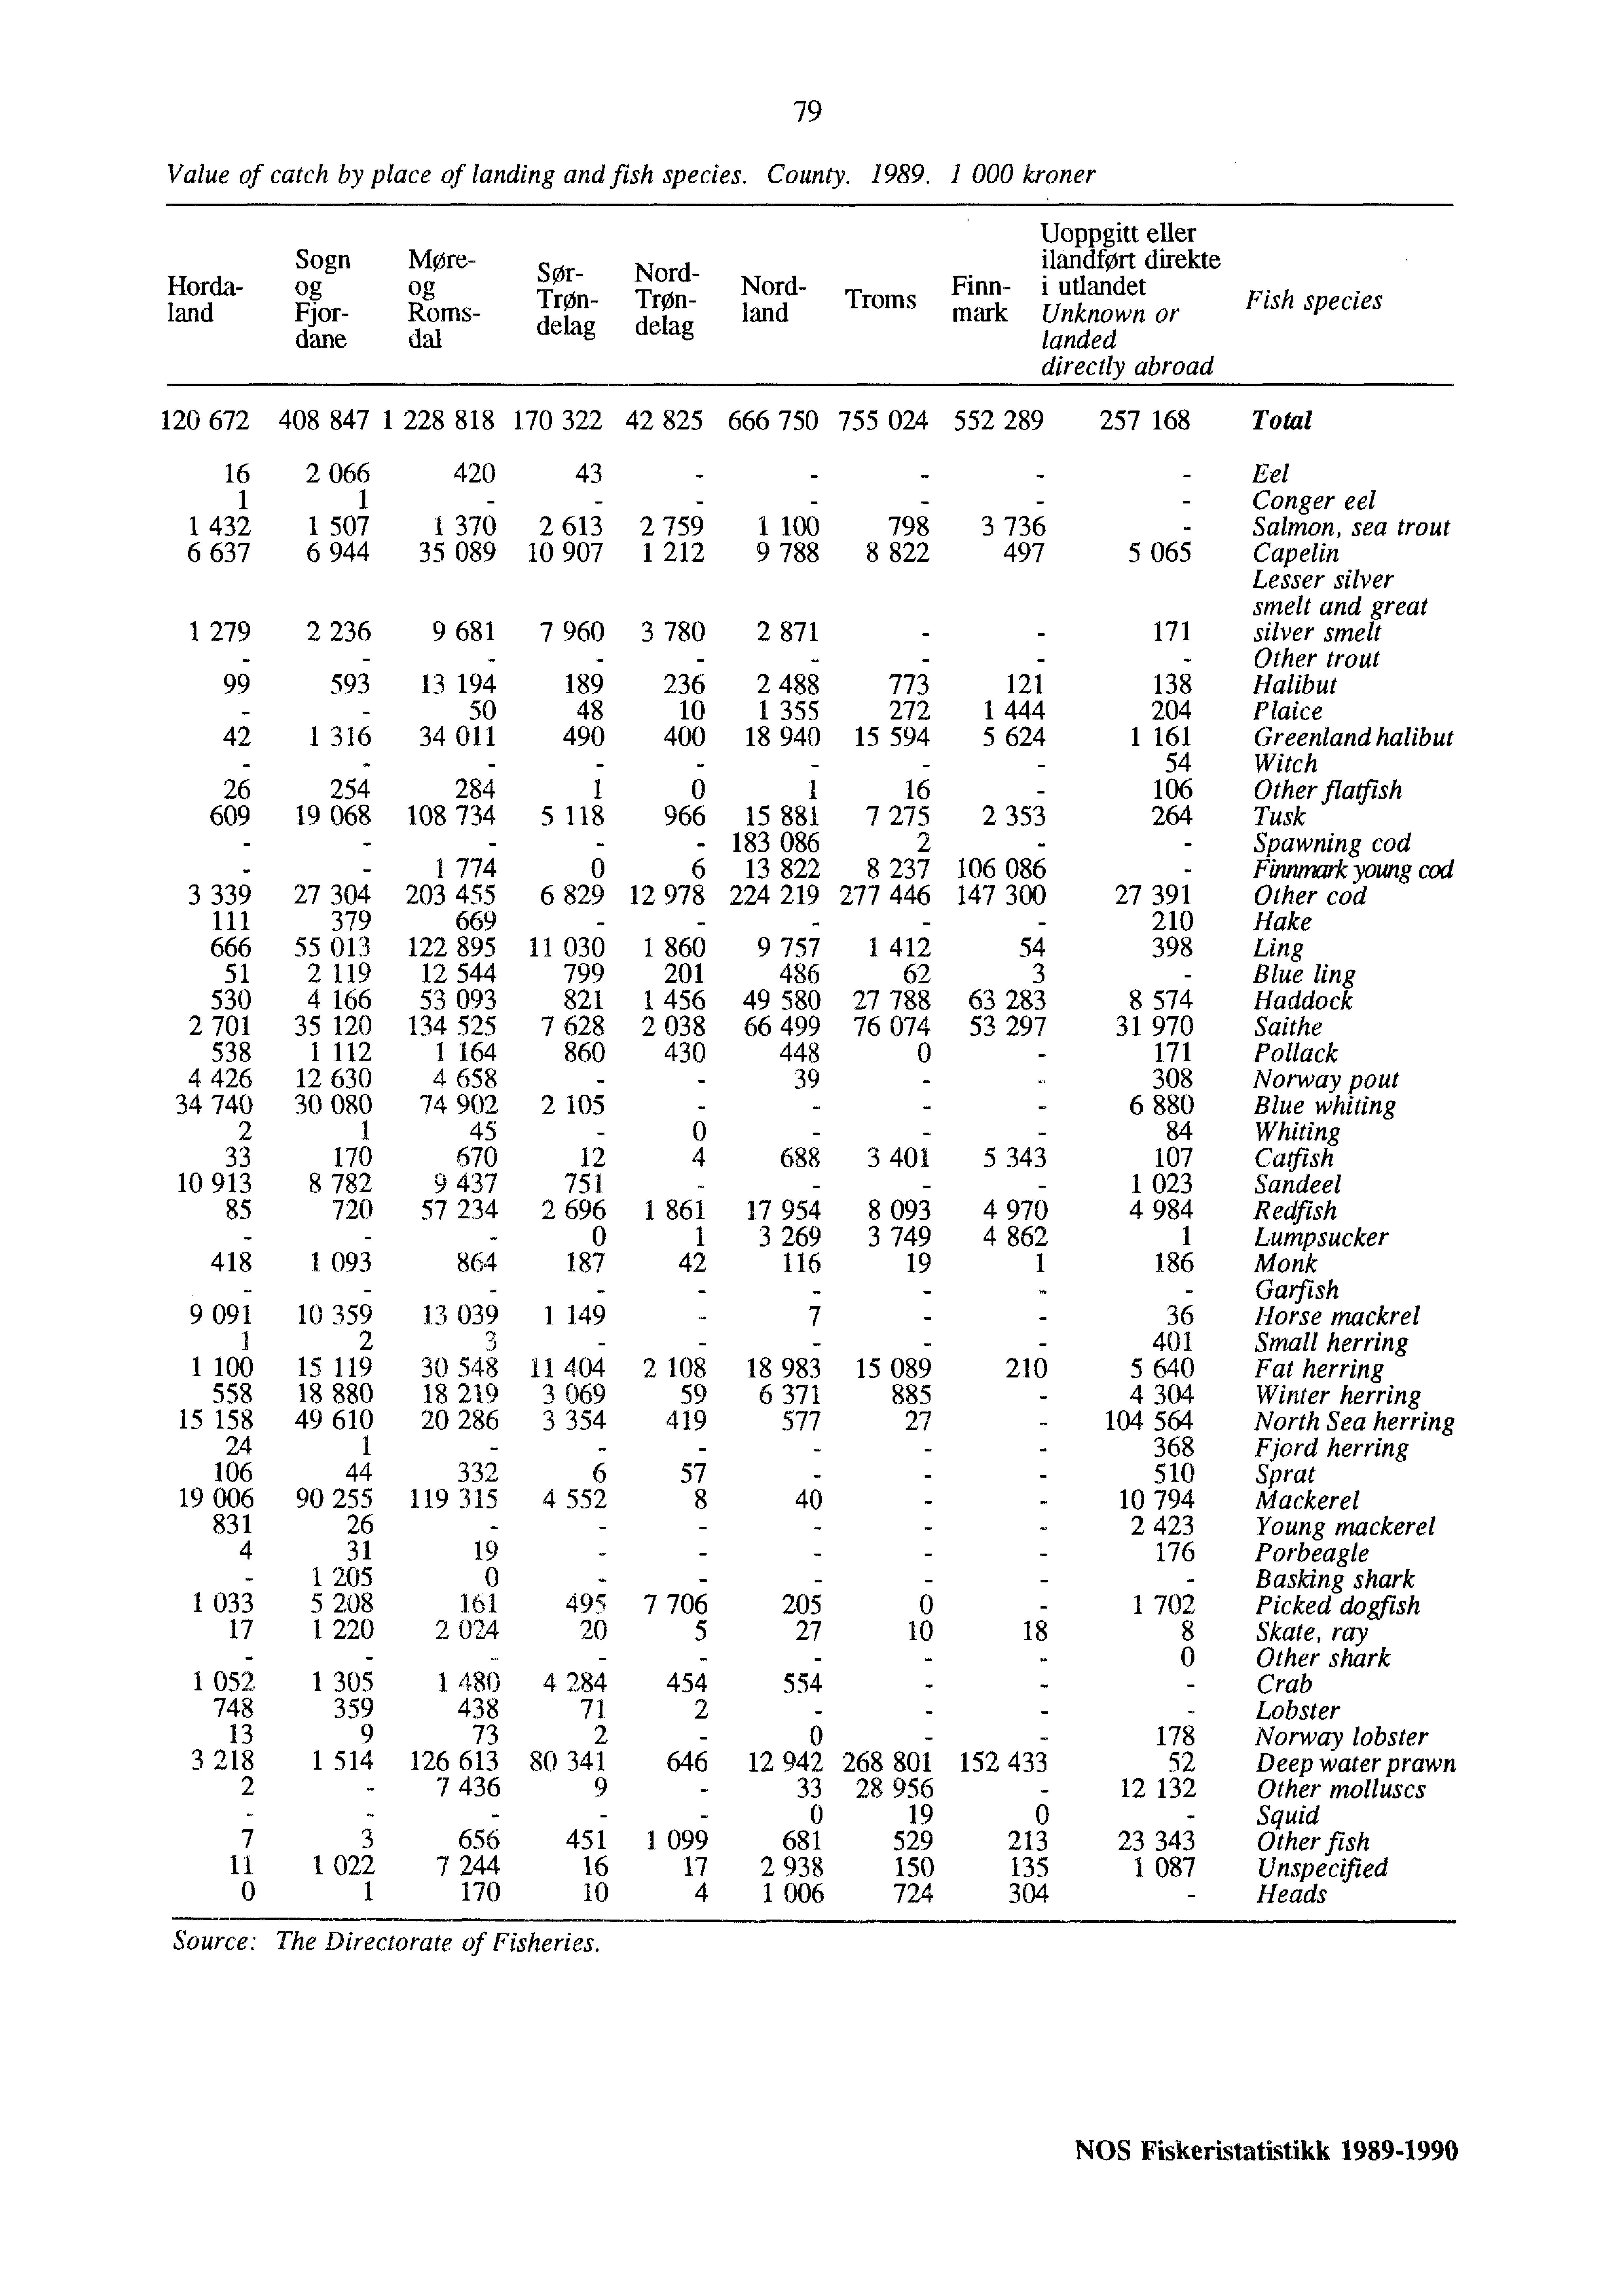 Value of catch by place of landing and fish species. County. 1989.